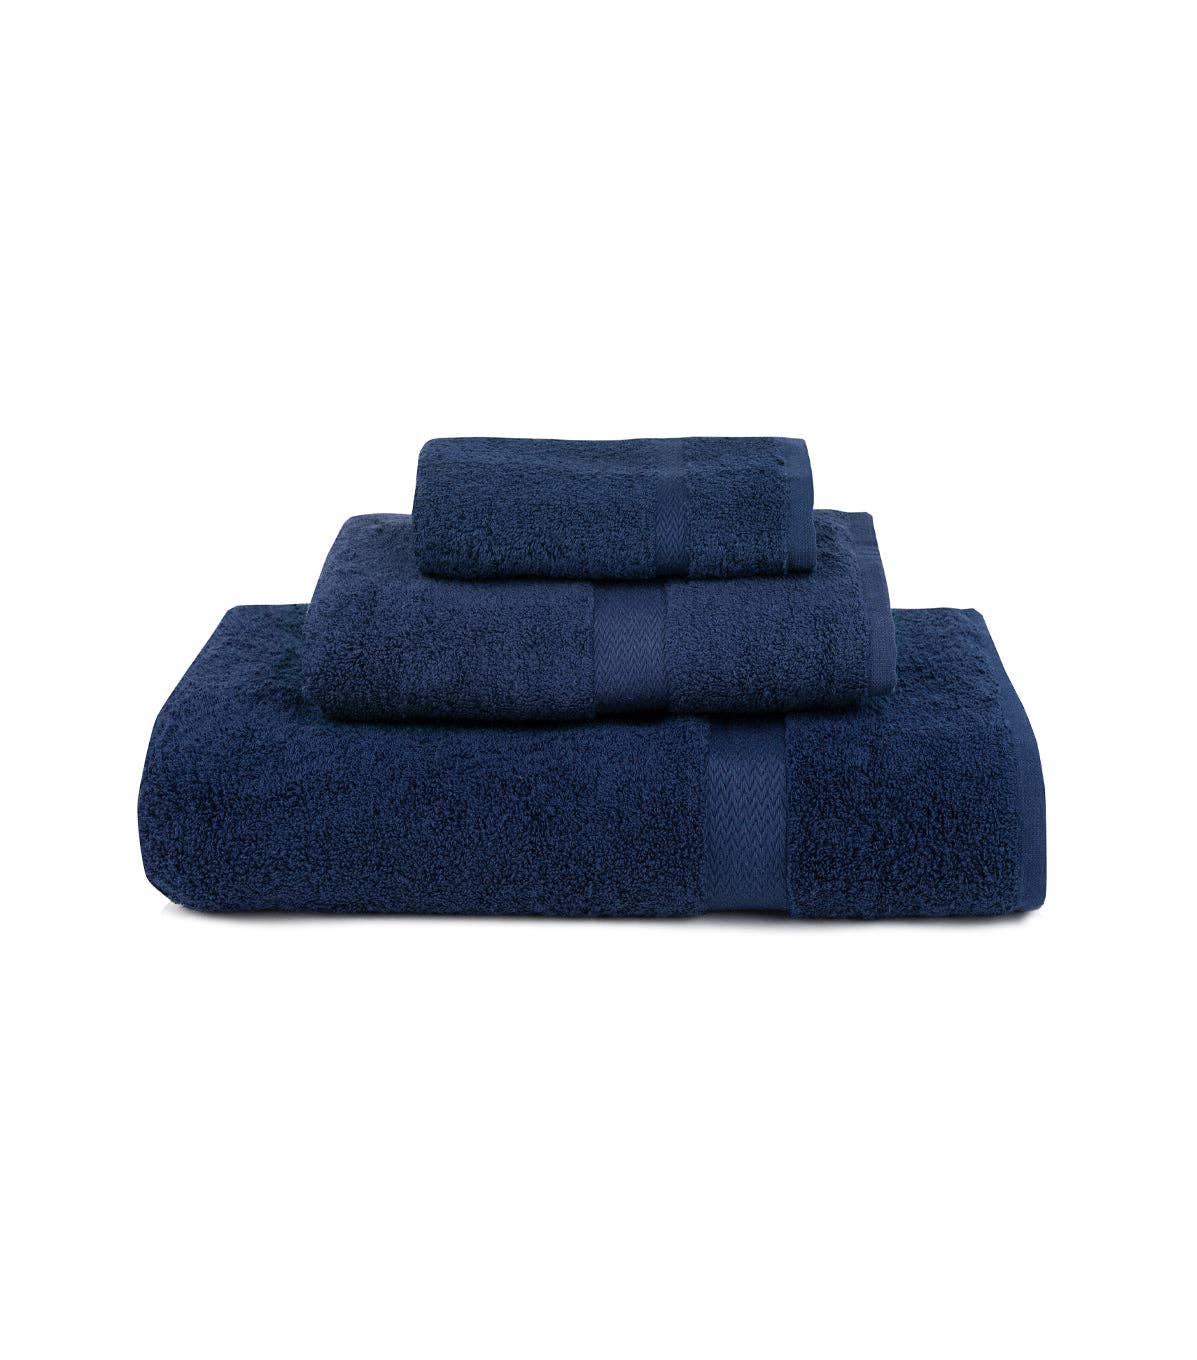 set of 3 cobalt blue almonda towels stacked on top of each other